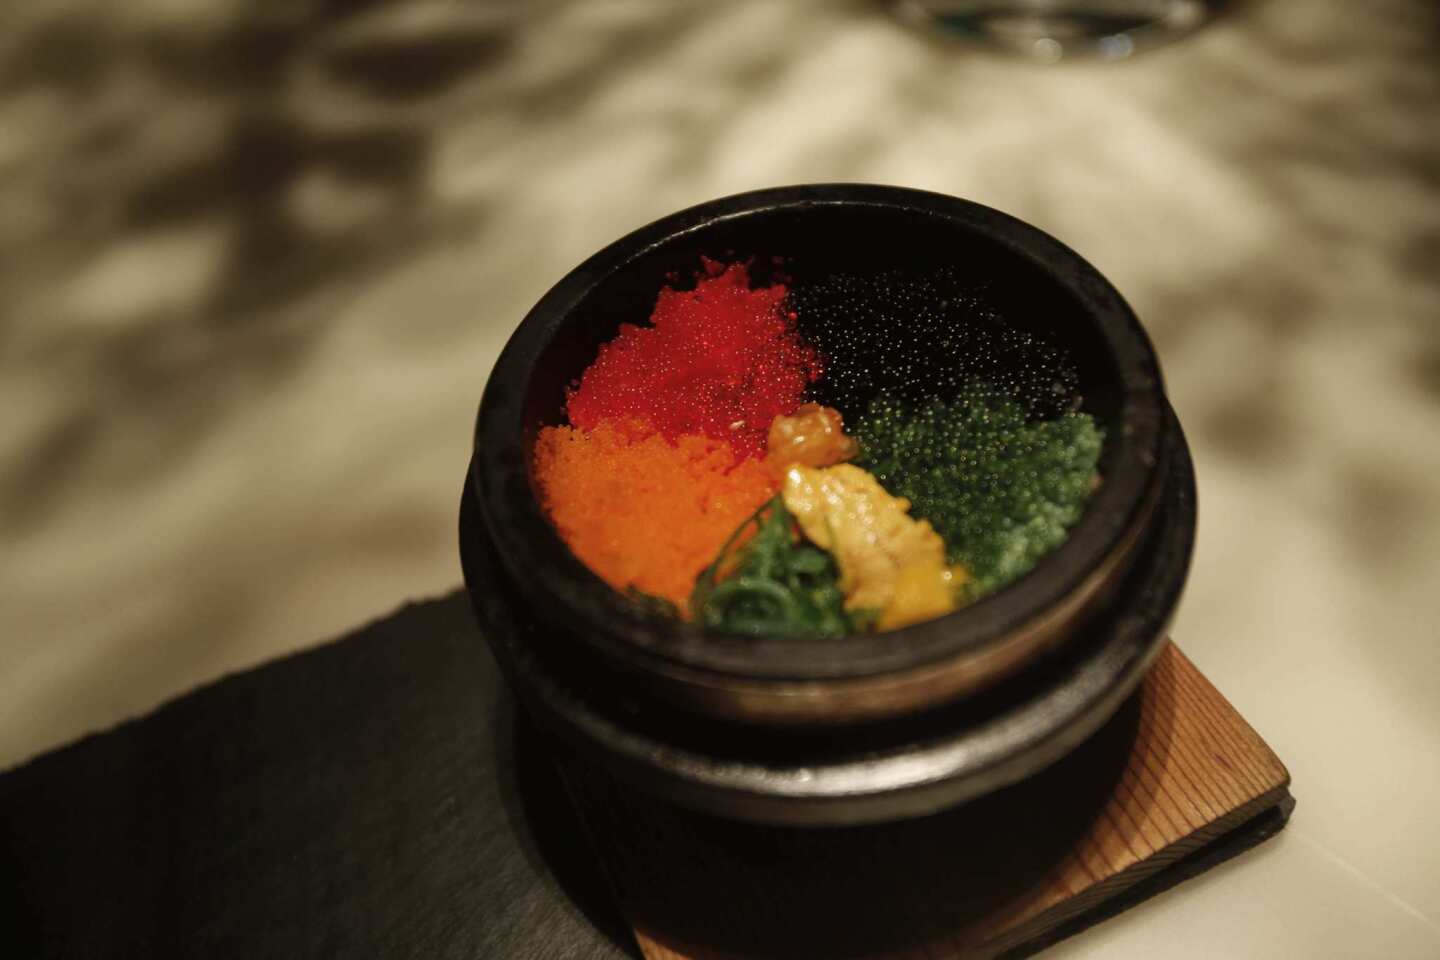 Stone pot roe rice is one of the chef's favorite creations.